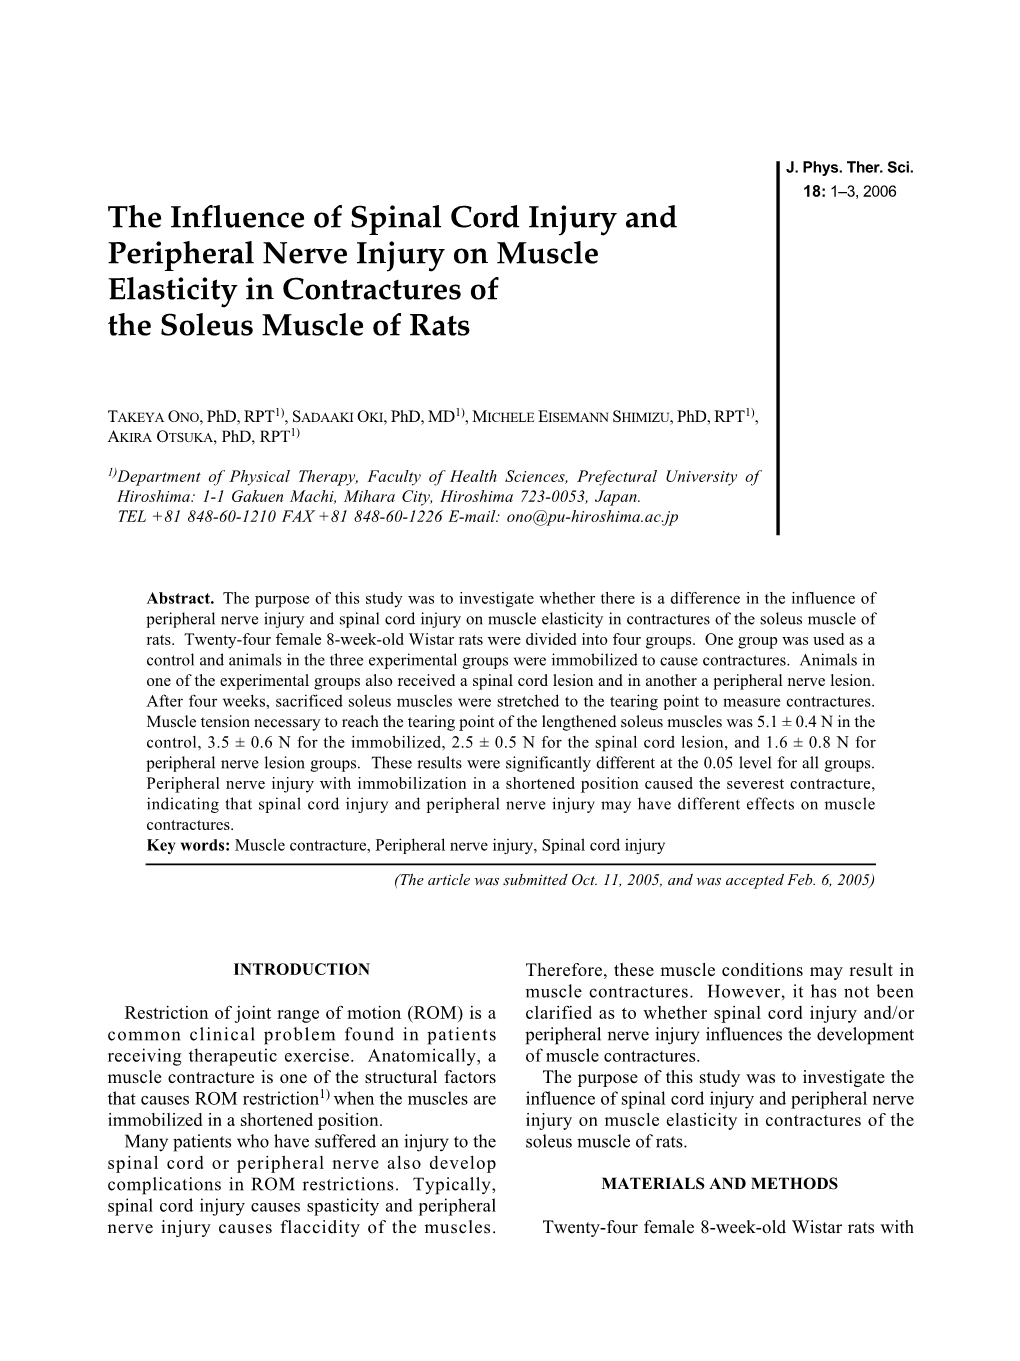 The Influence of Spinal Cord Injury and Peripheral Nerve Injury on Muscle Elasticity in Contractures of the Soleus Muscle of Rats